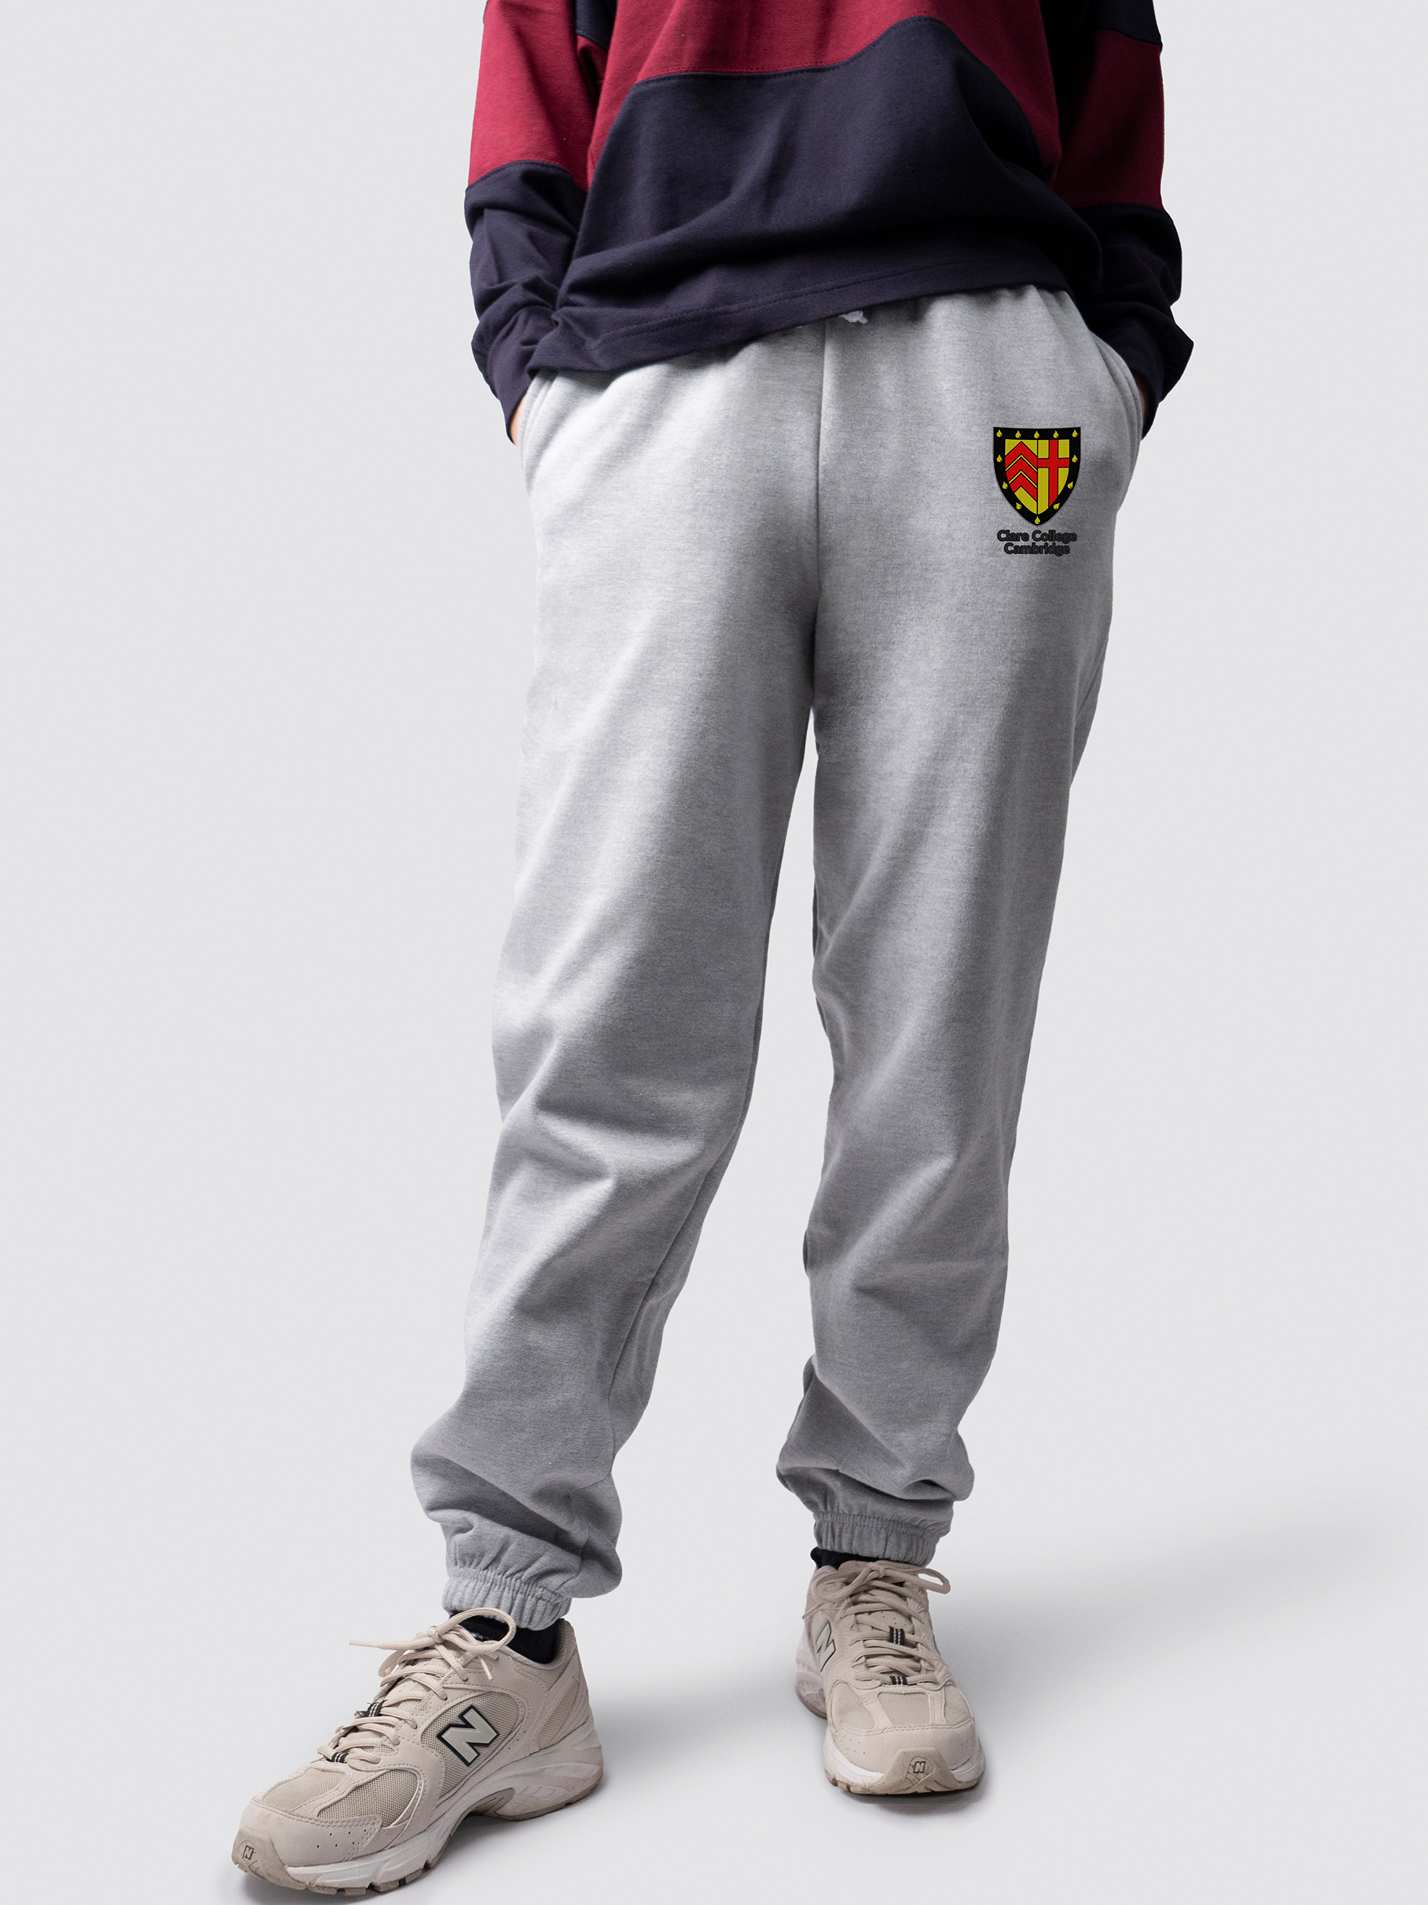 Clare College Womens Cool Athletic Pants